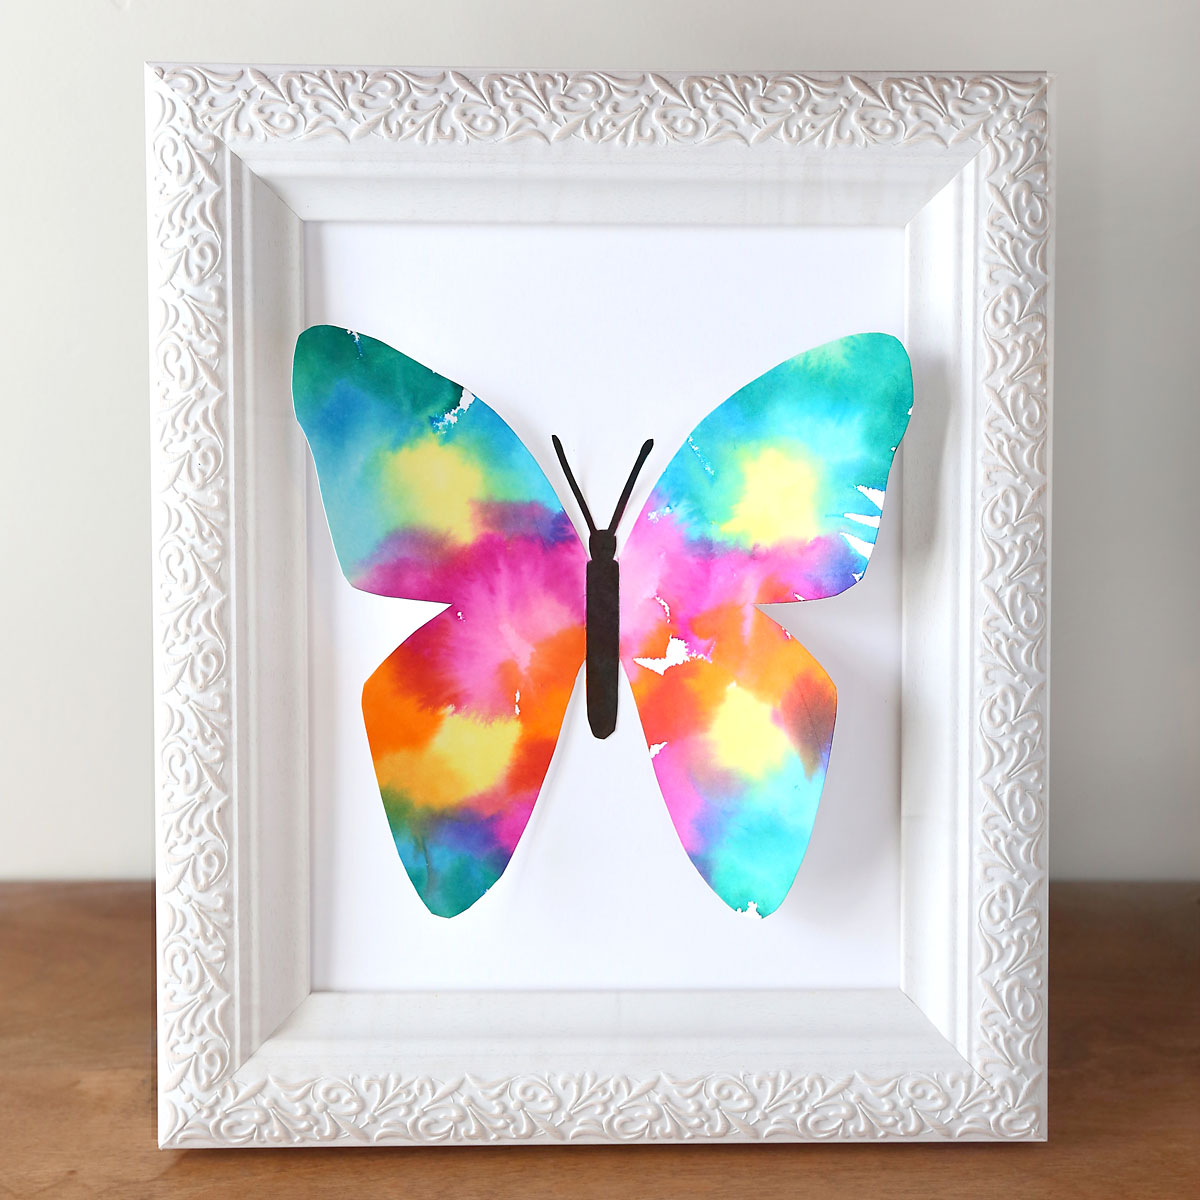 Tissue Paper Butterfly Art {easy project for kids} - It's Always Autumn